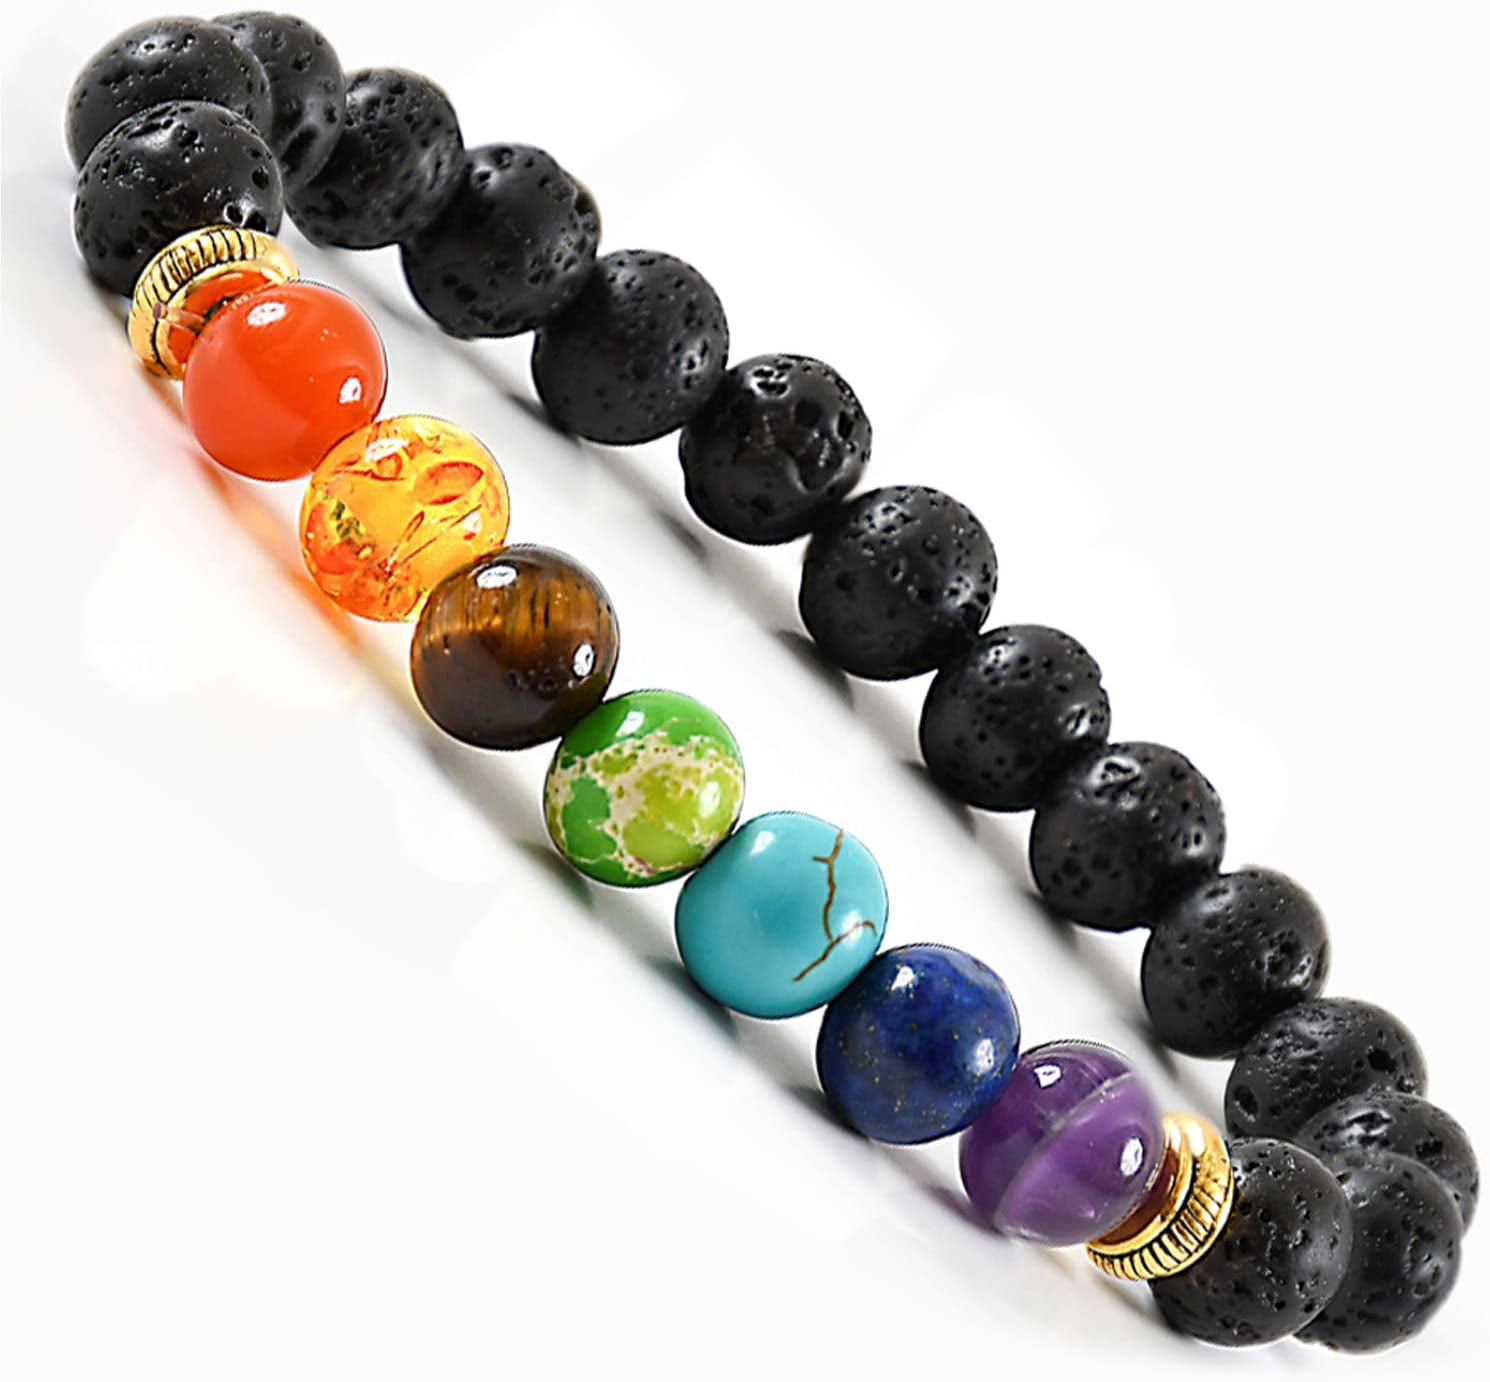 Essential Oils Funky Bright Crystals Stackable Mala Lava Yoga Bracelet 7 or 8 Inches 8mm Round Beads Red Black Blue Brown